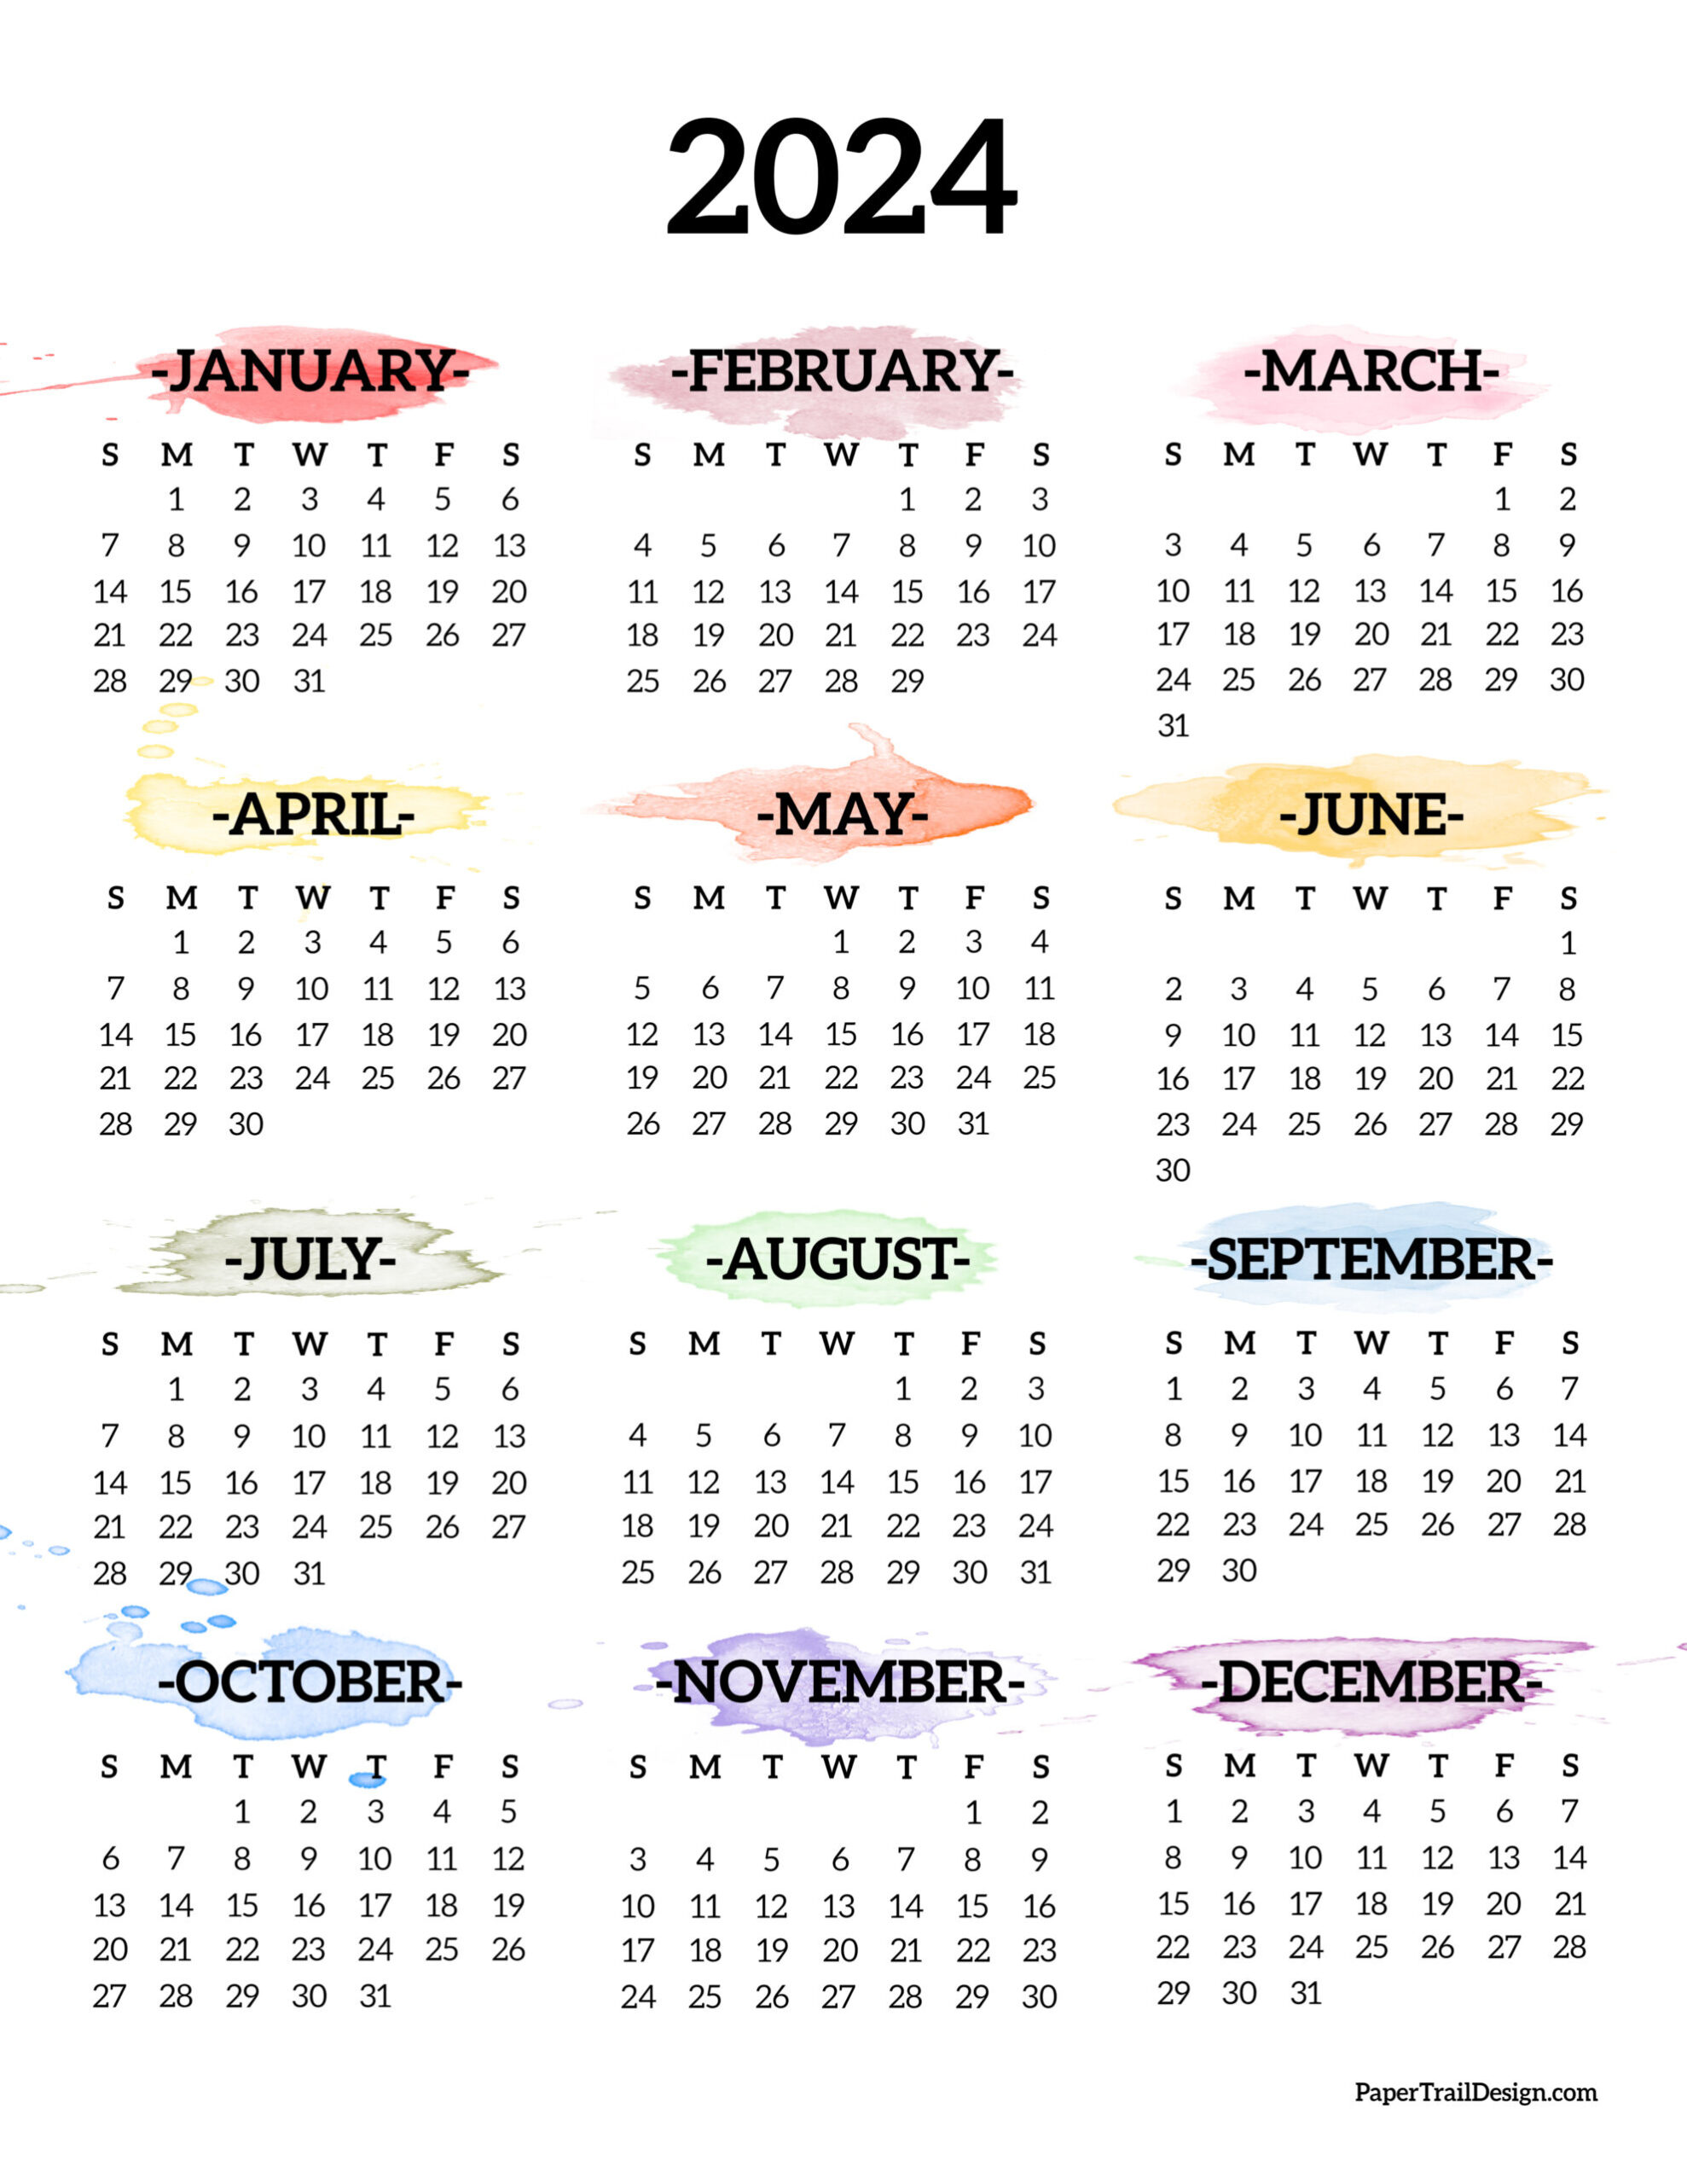 Calendar 2024 Printable One Page - Paper Trail Design | 2024 Full Year Calendar View